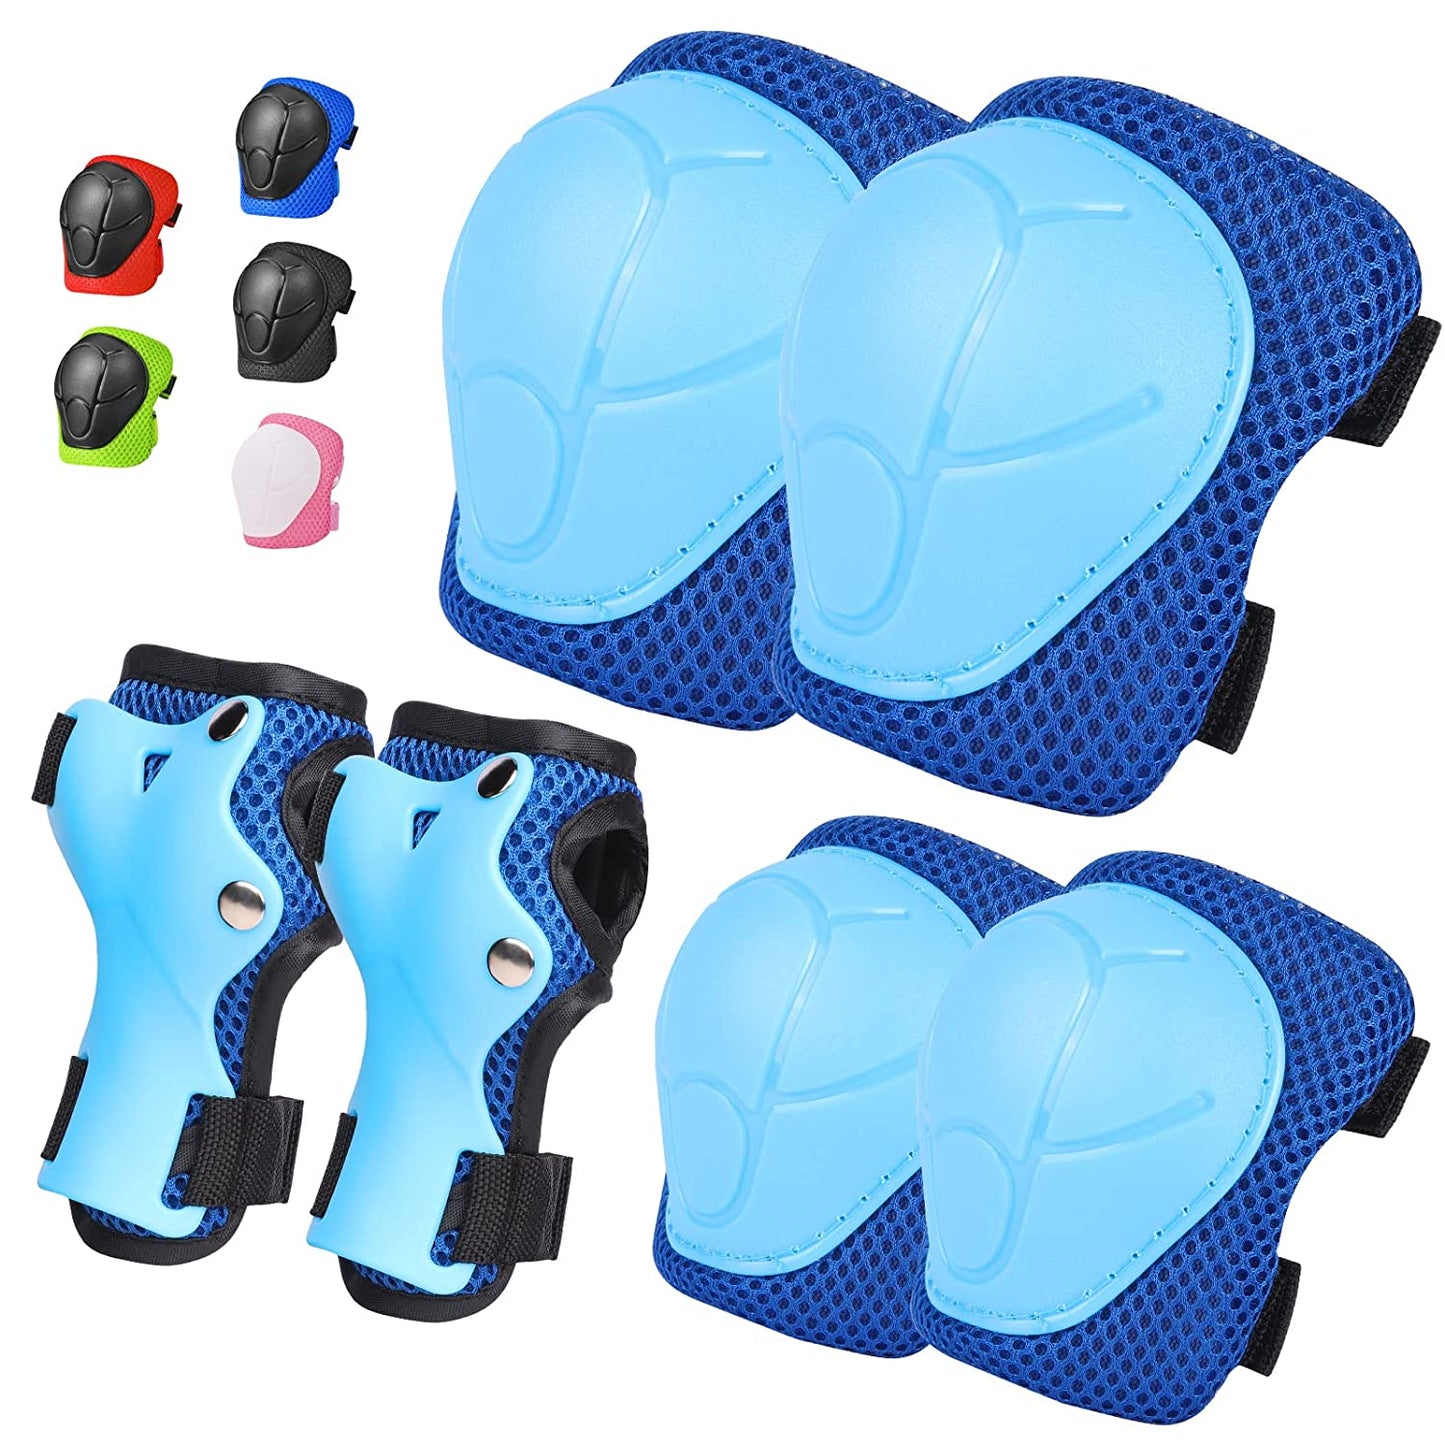 6 in 1 Protective Equipment Safety Set